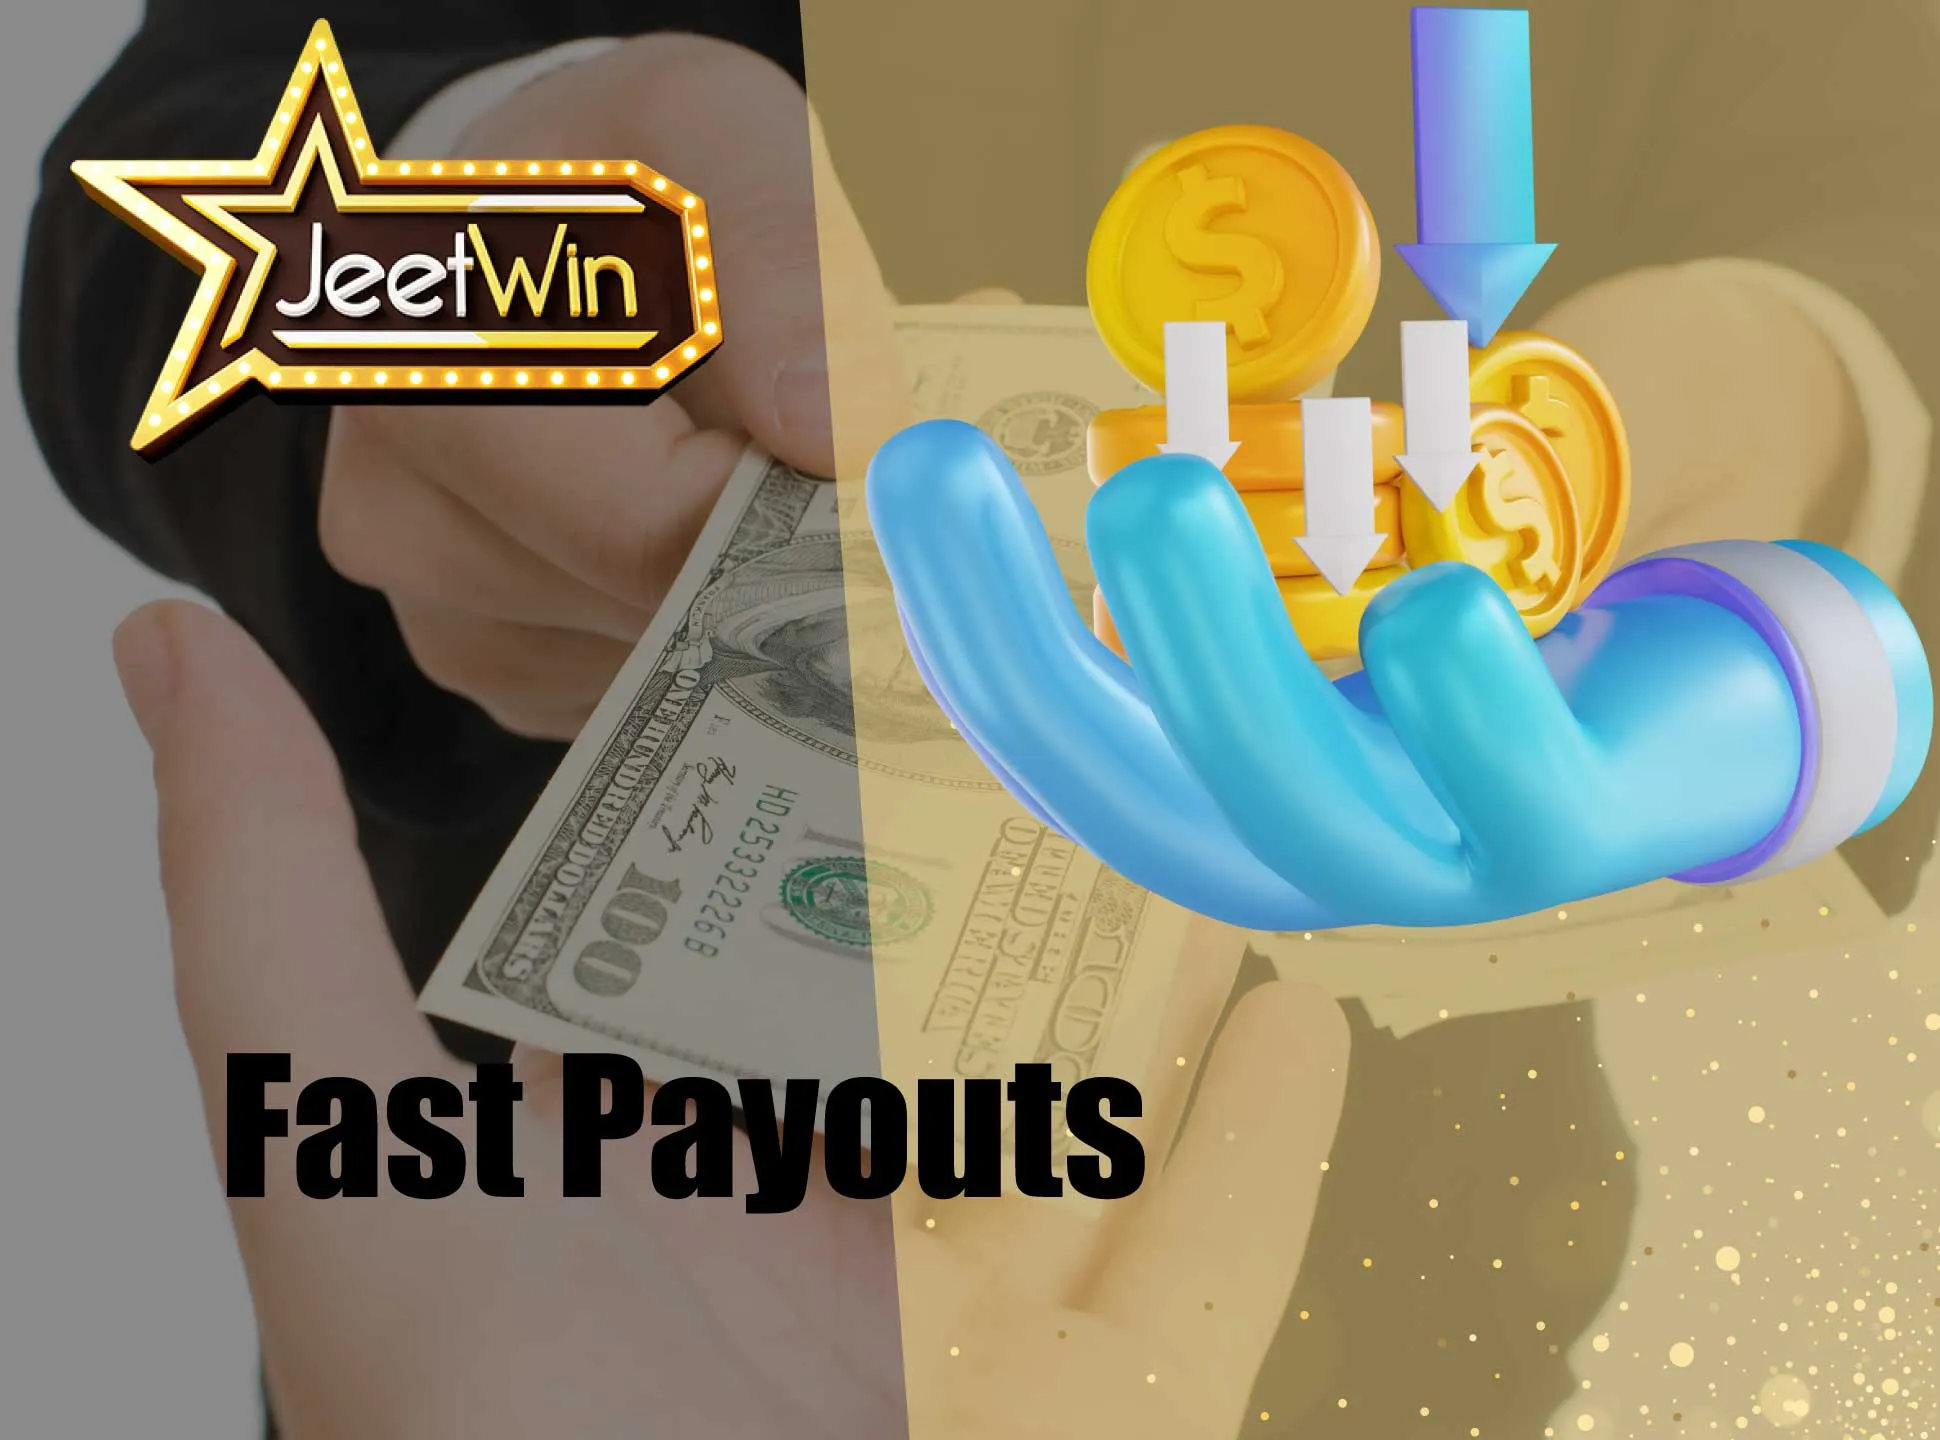 You can instantly withdraw money from Jeetwin.